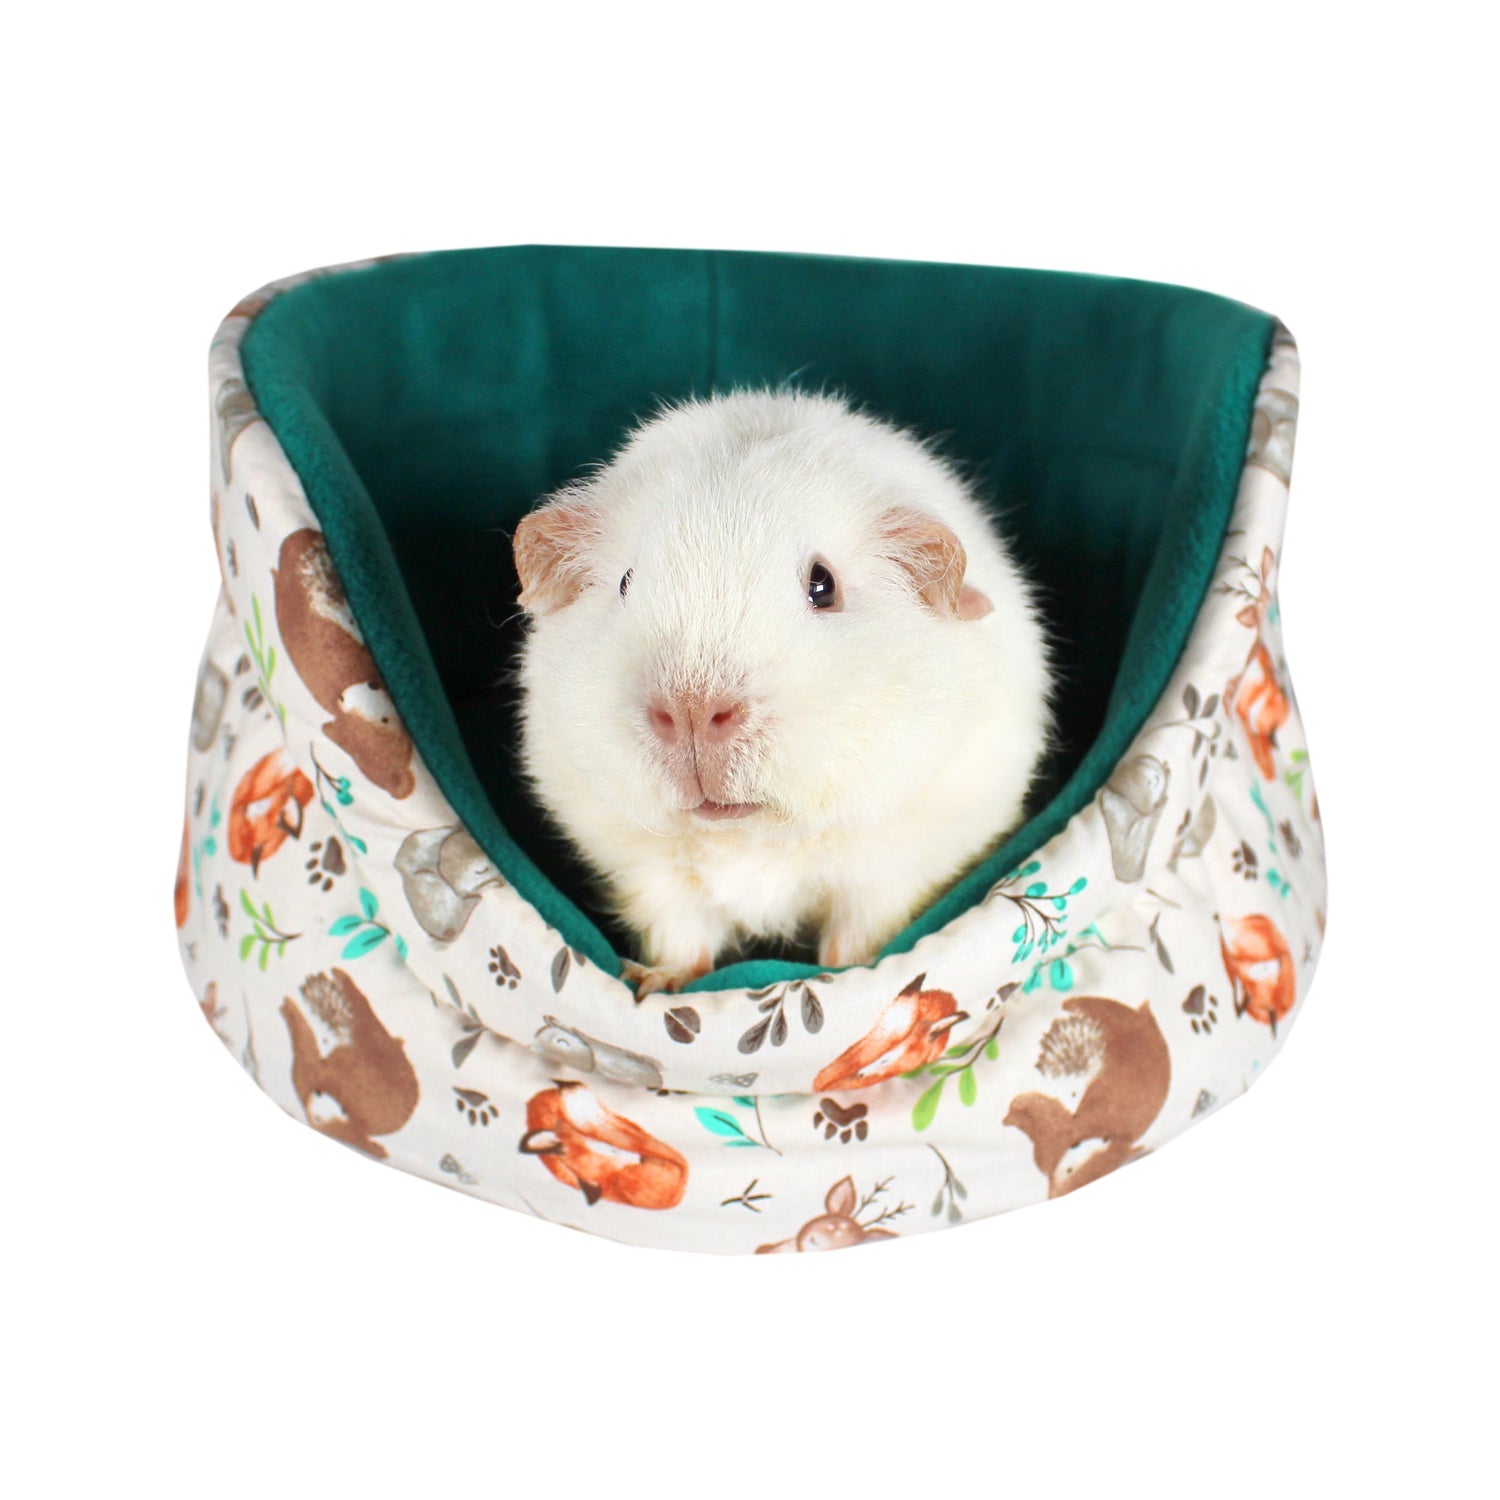 Woodland Creatures Pattern Bed for Guinea Pig, front view with guinea pig sat inside